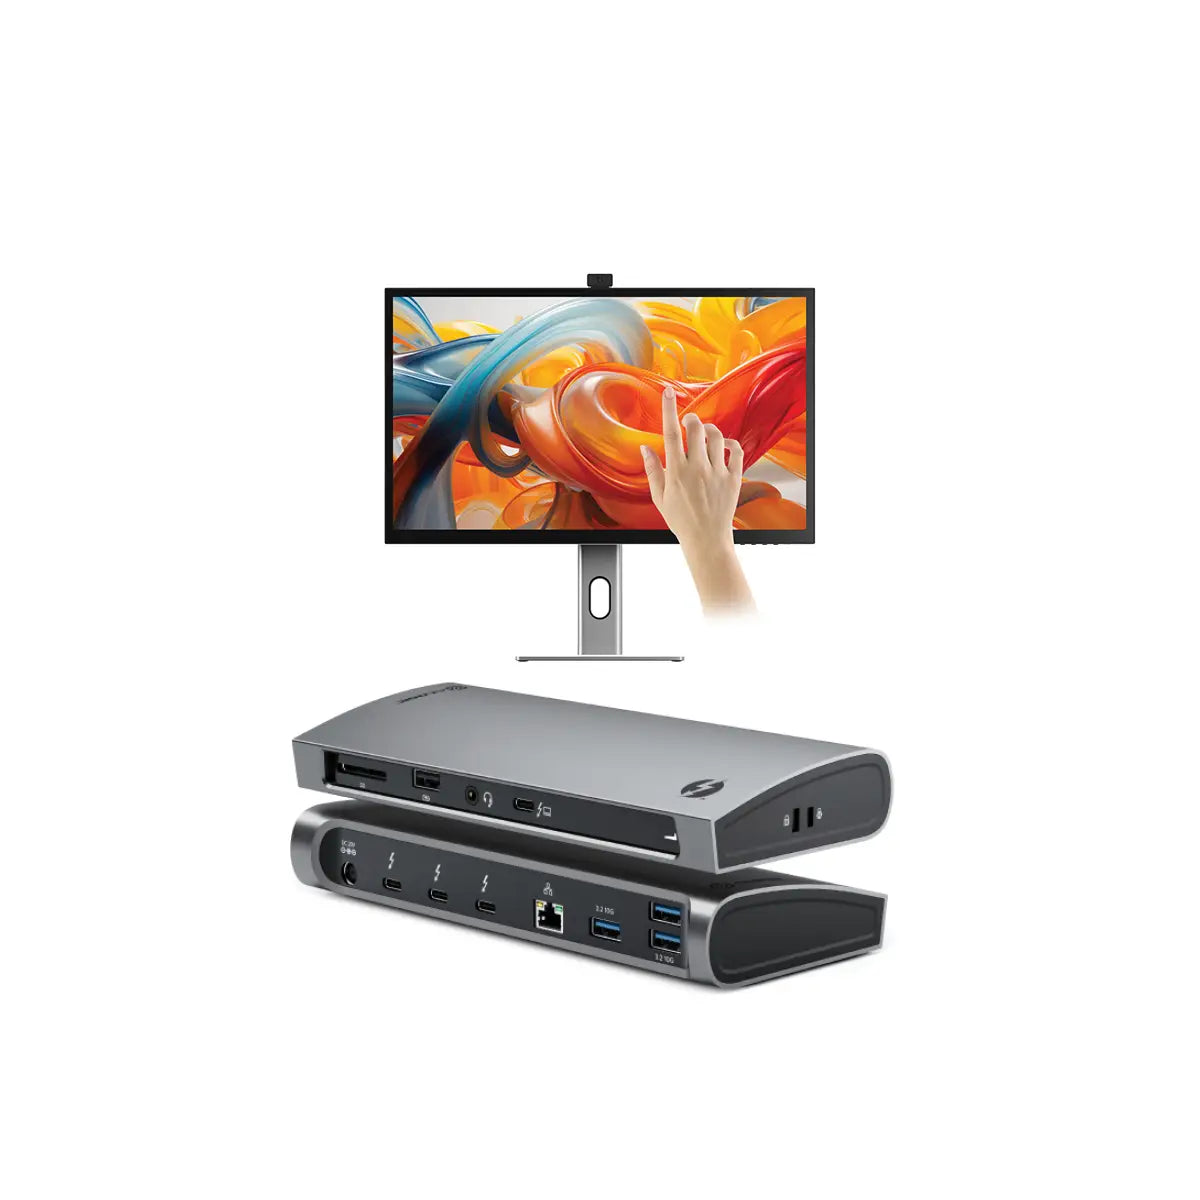 clarity-pro-touch-27-uhd-4k-monitor-with-65w-pd-webcam-and-touchscreen-thunderbolt-4-blaze-docking-station_1